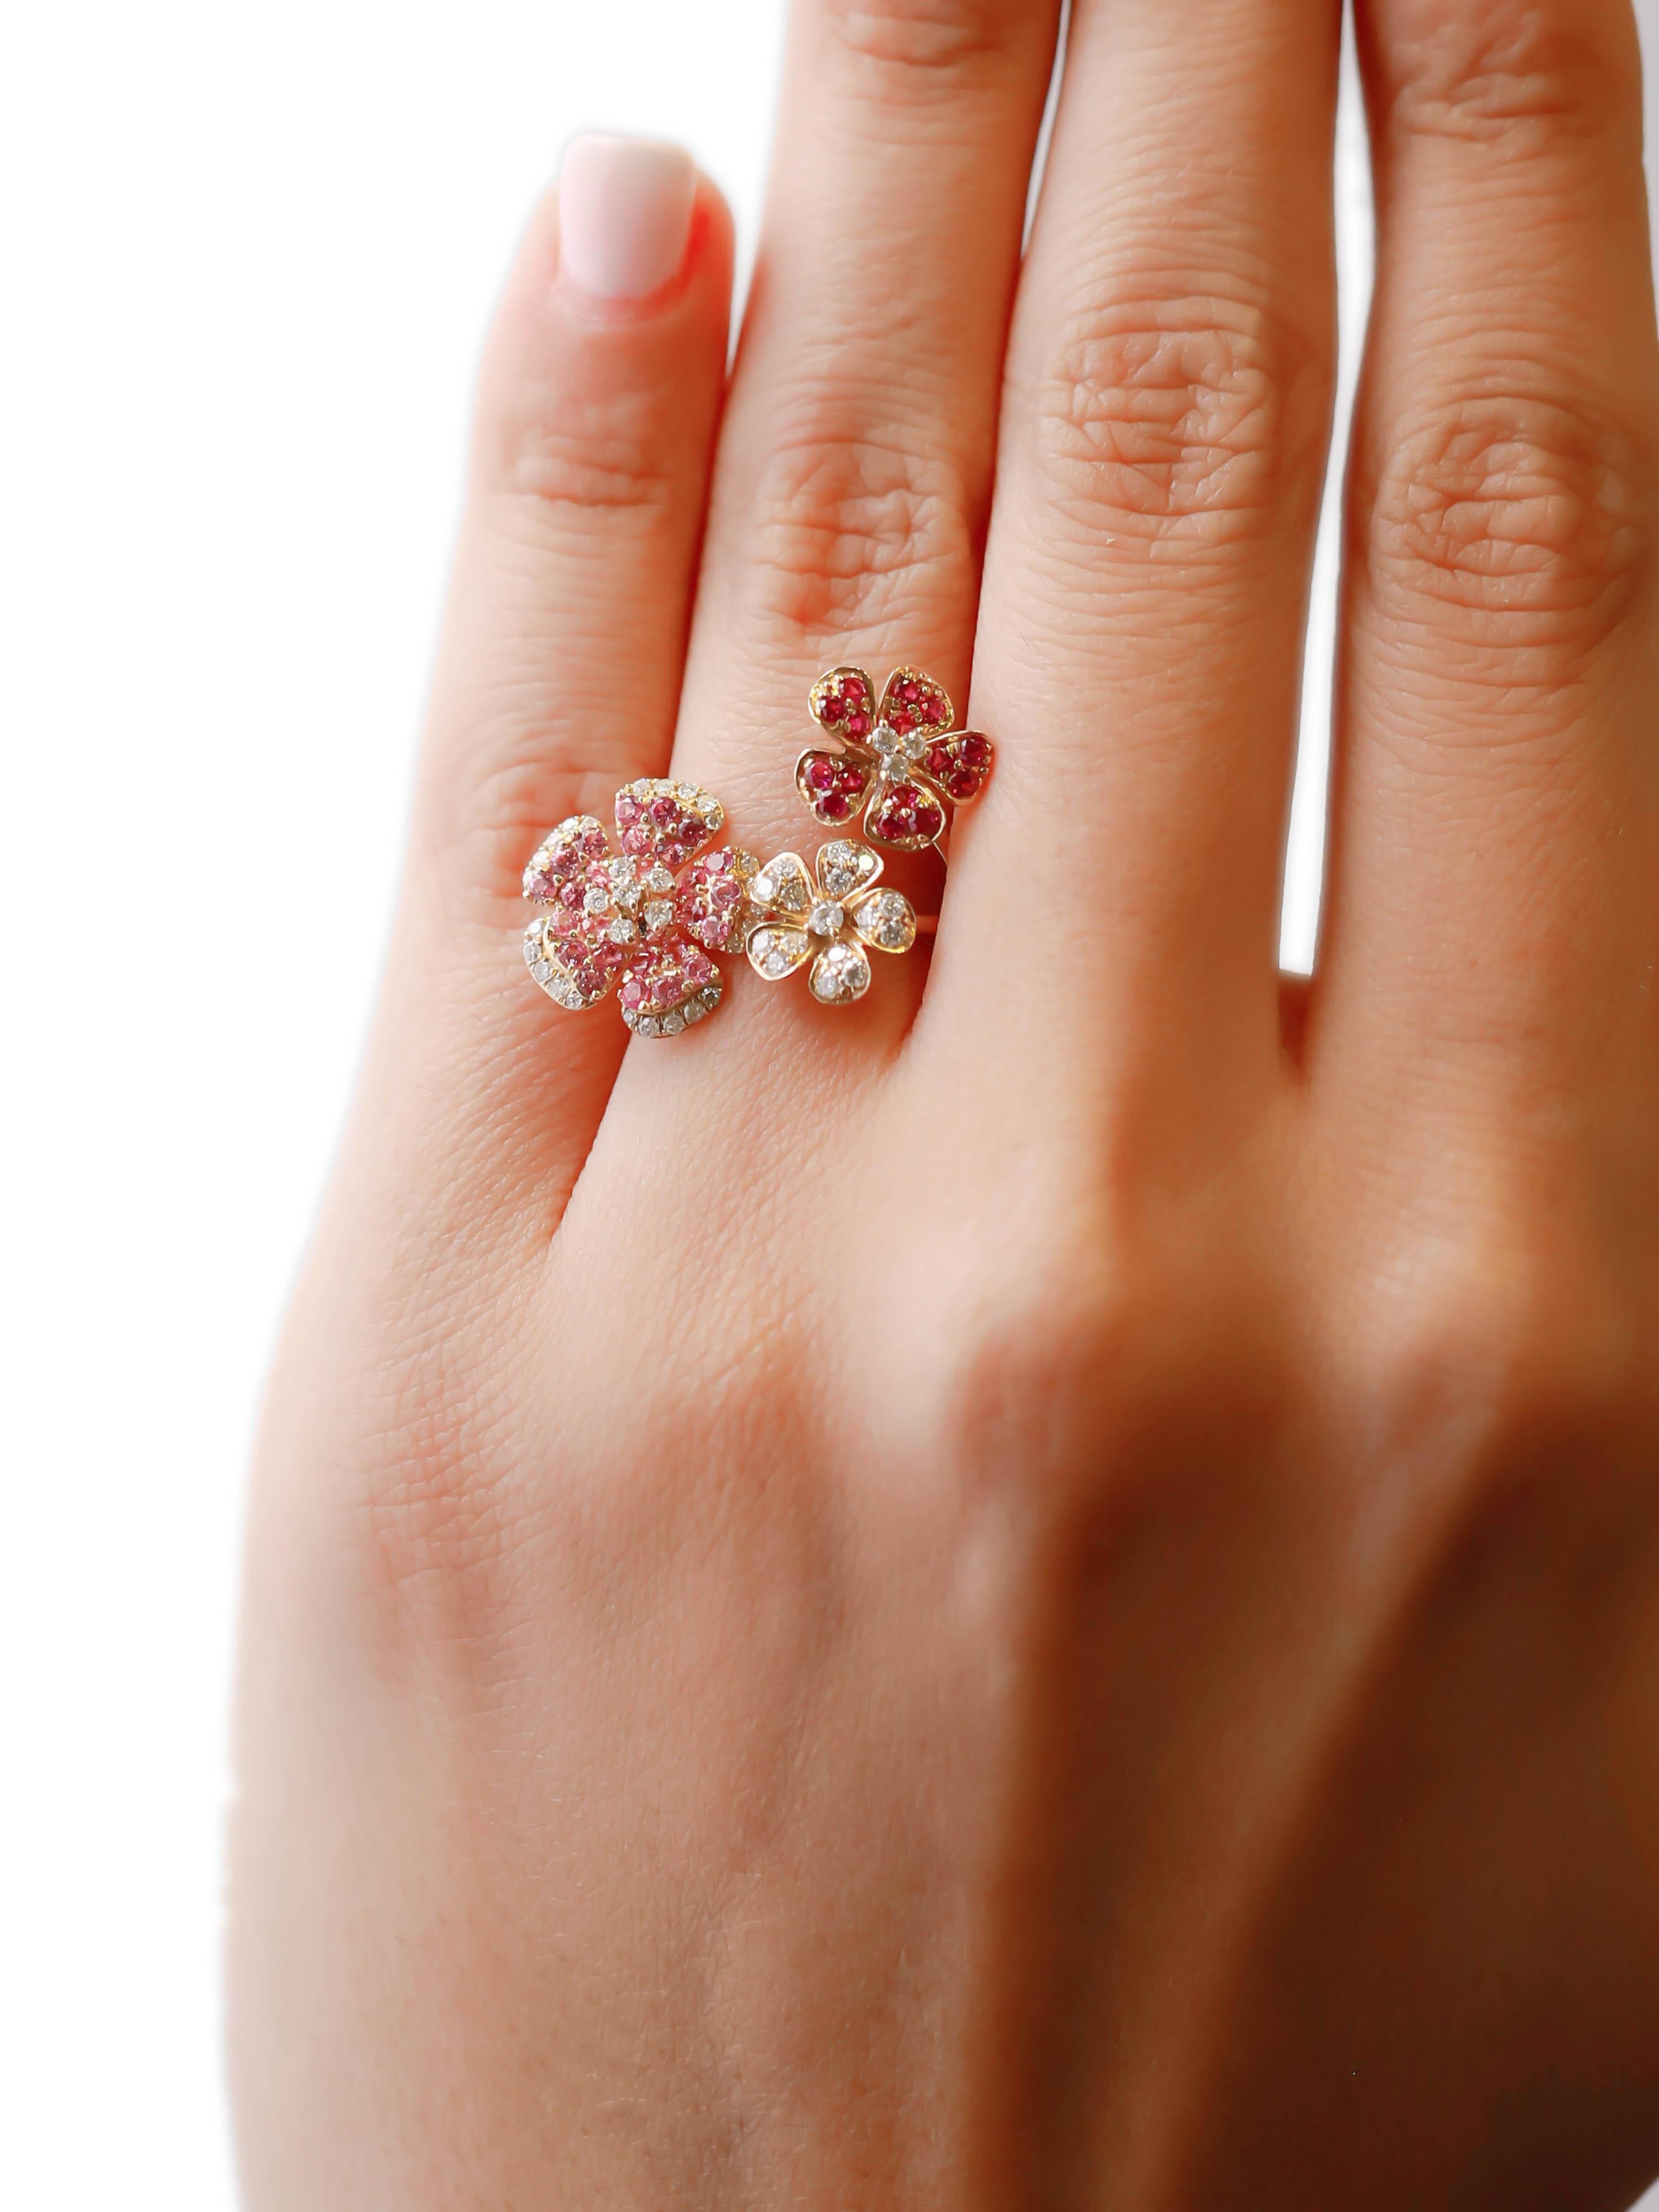 Round Cut 14K Yellow Gold Three Daisy Flower Floral Ring 1.08Ct Pink Sapphire Pave Diamond For Sale